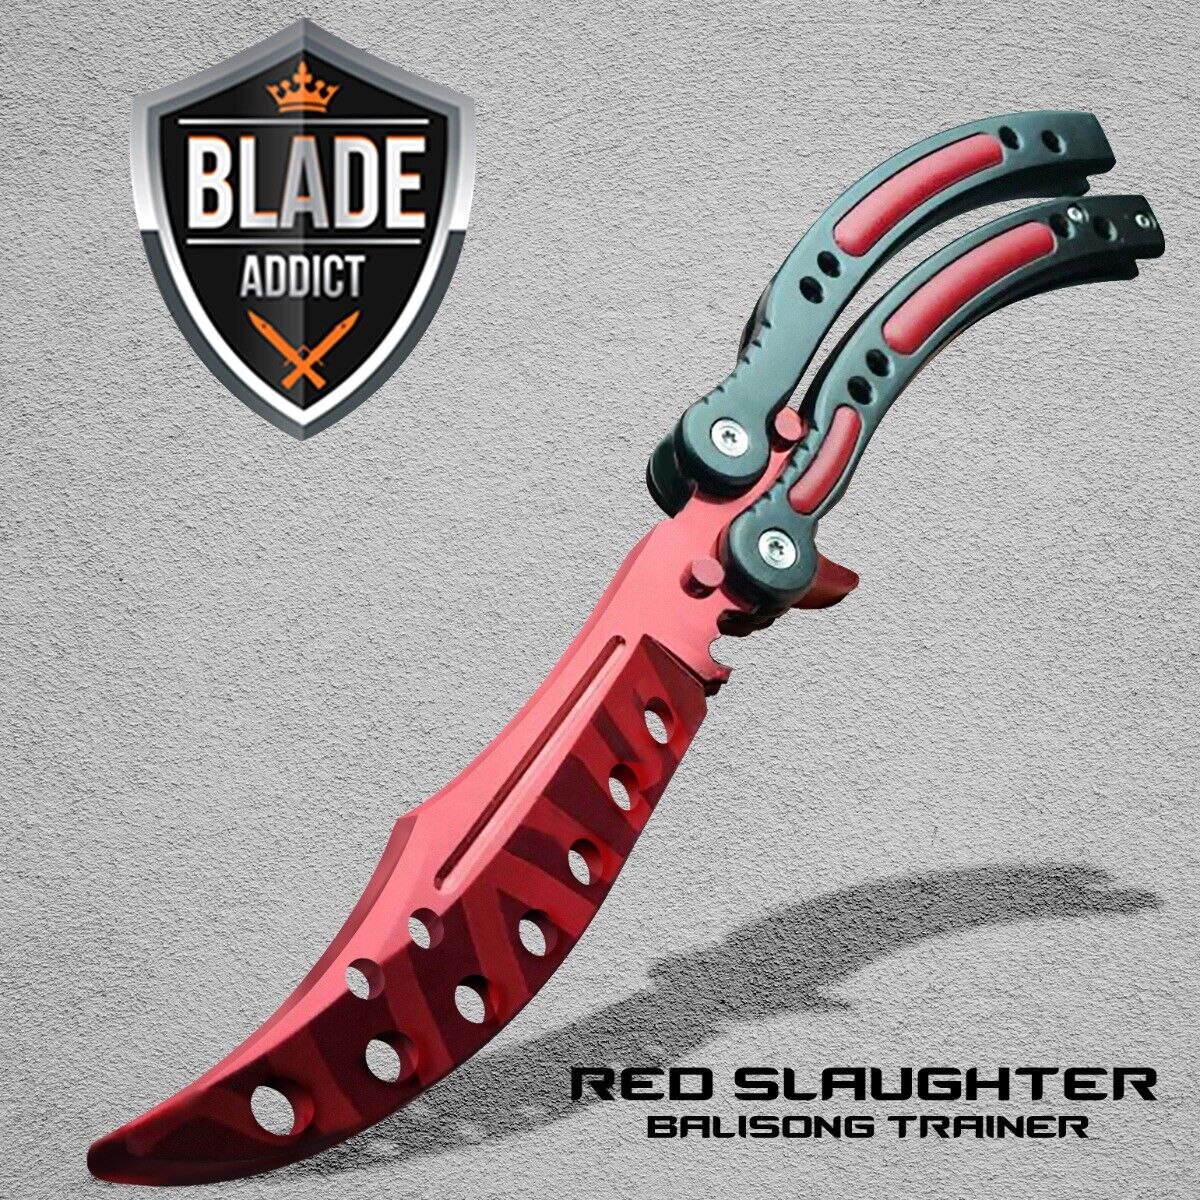 CSGO RED SLAUGHTER Practice Knife Balisong Butterfly Tactical Trainer Knife NEW